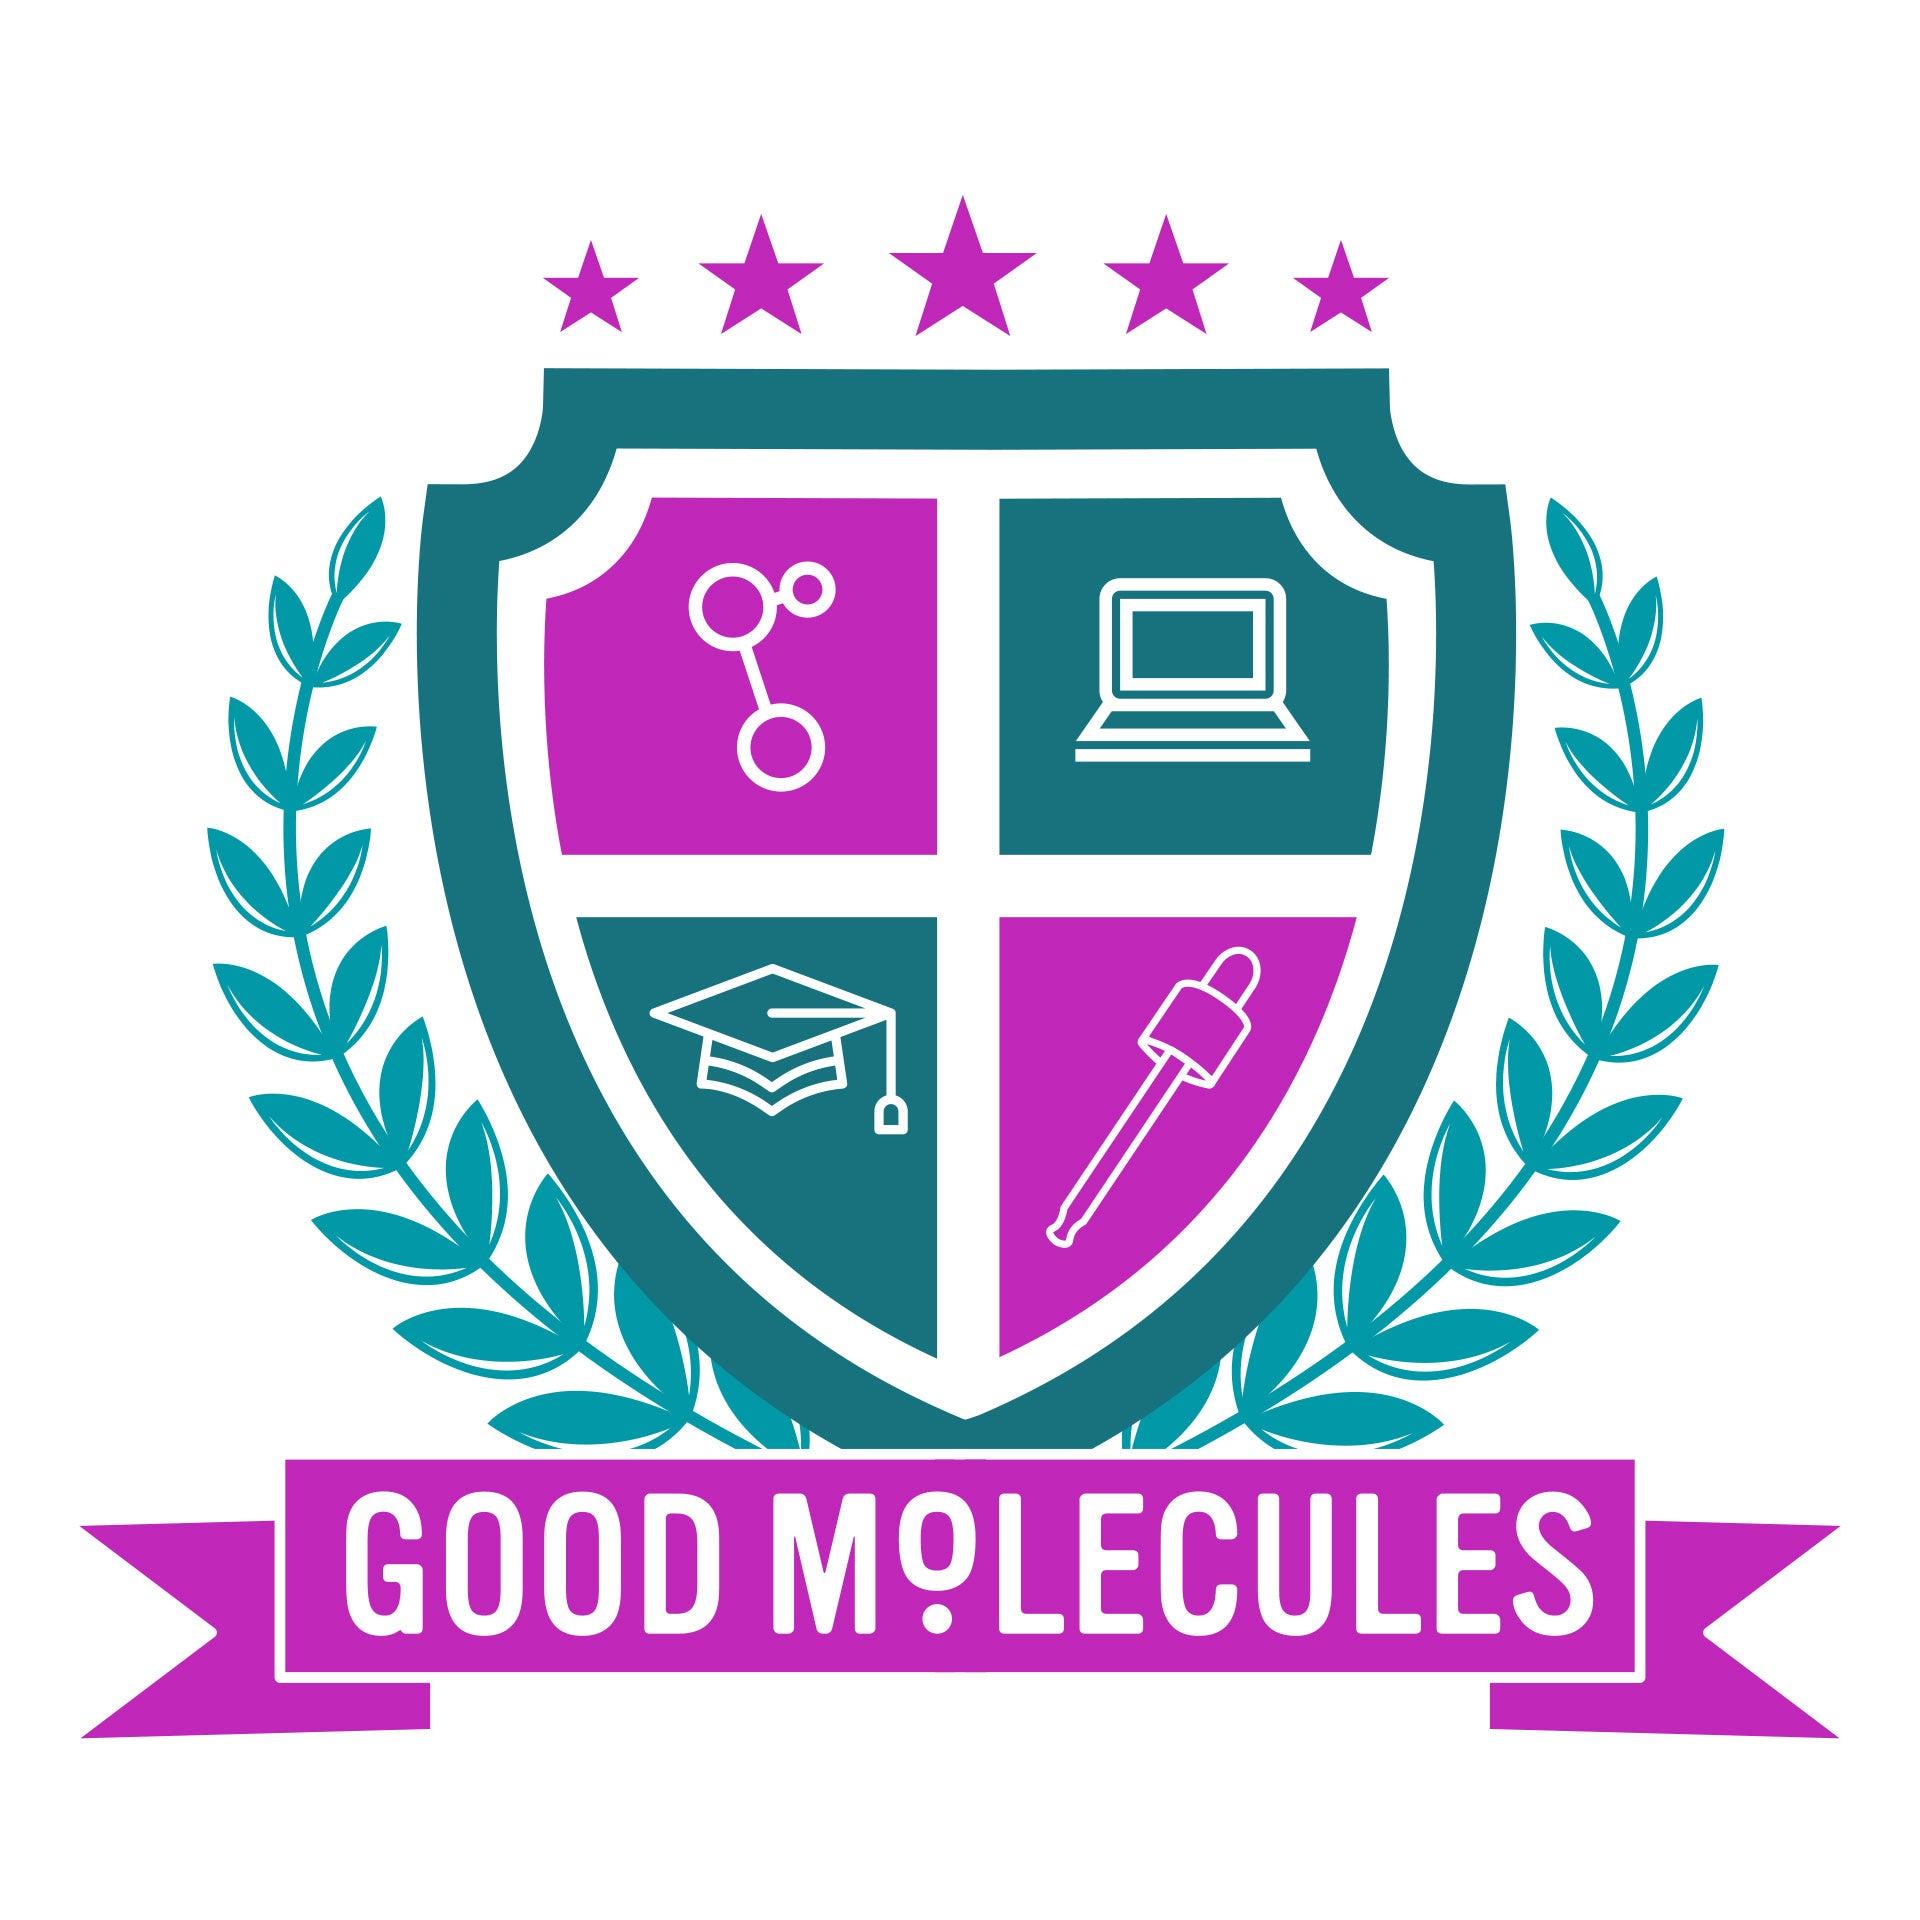 Good Molecules is coming to Mississippi State University!